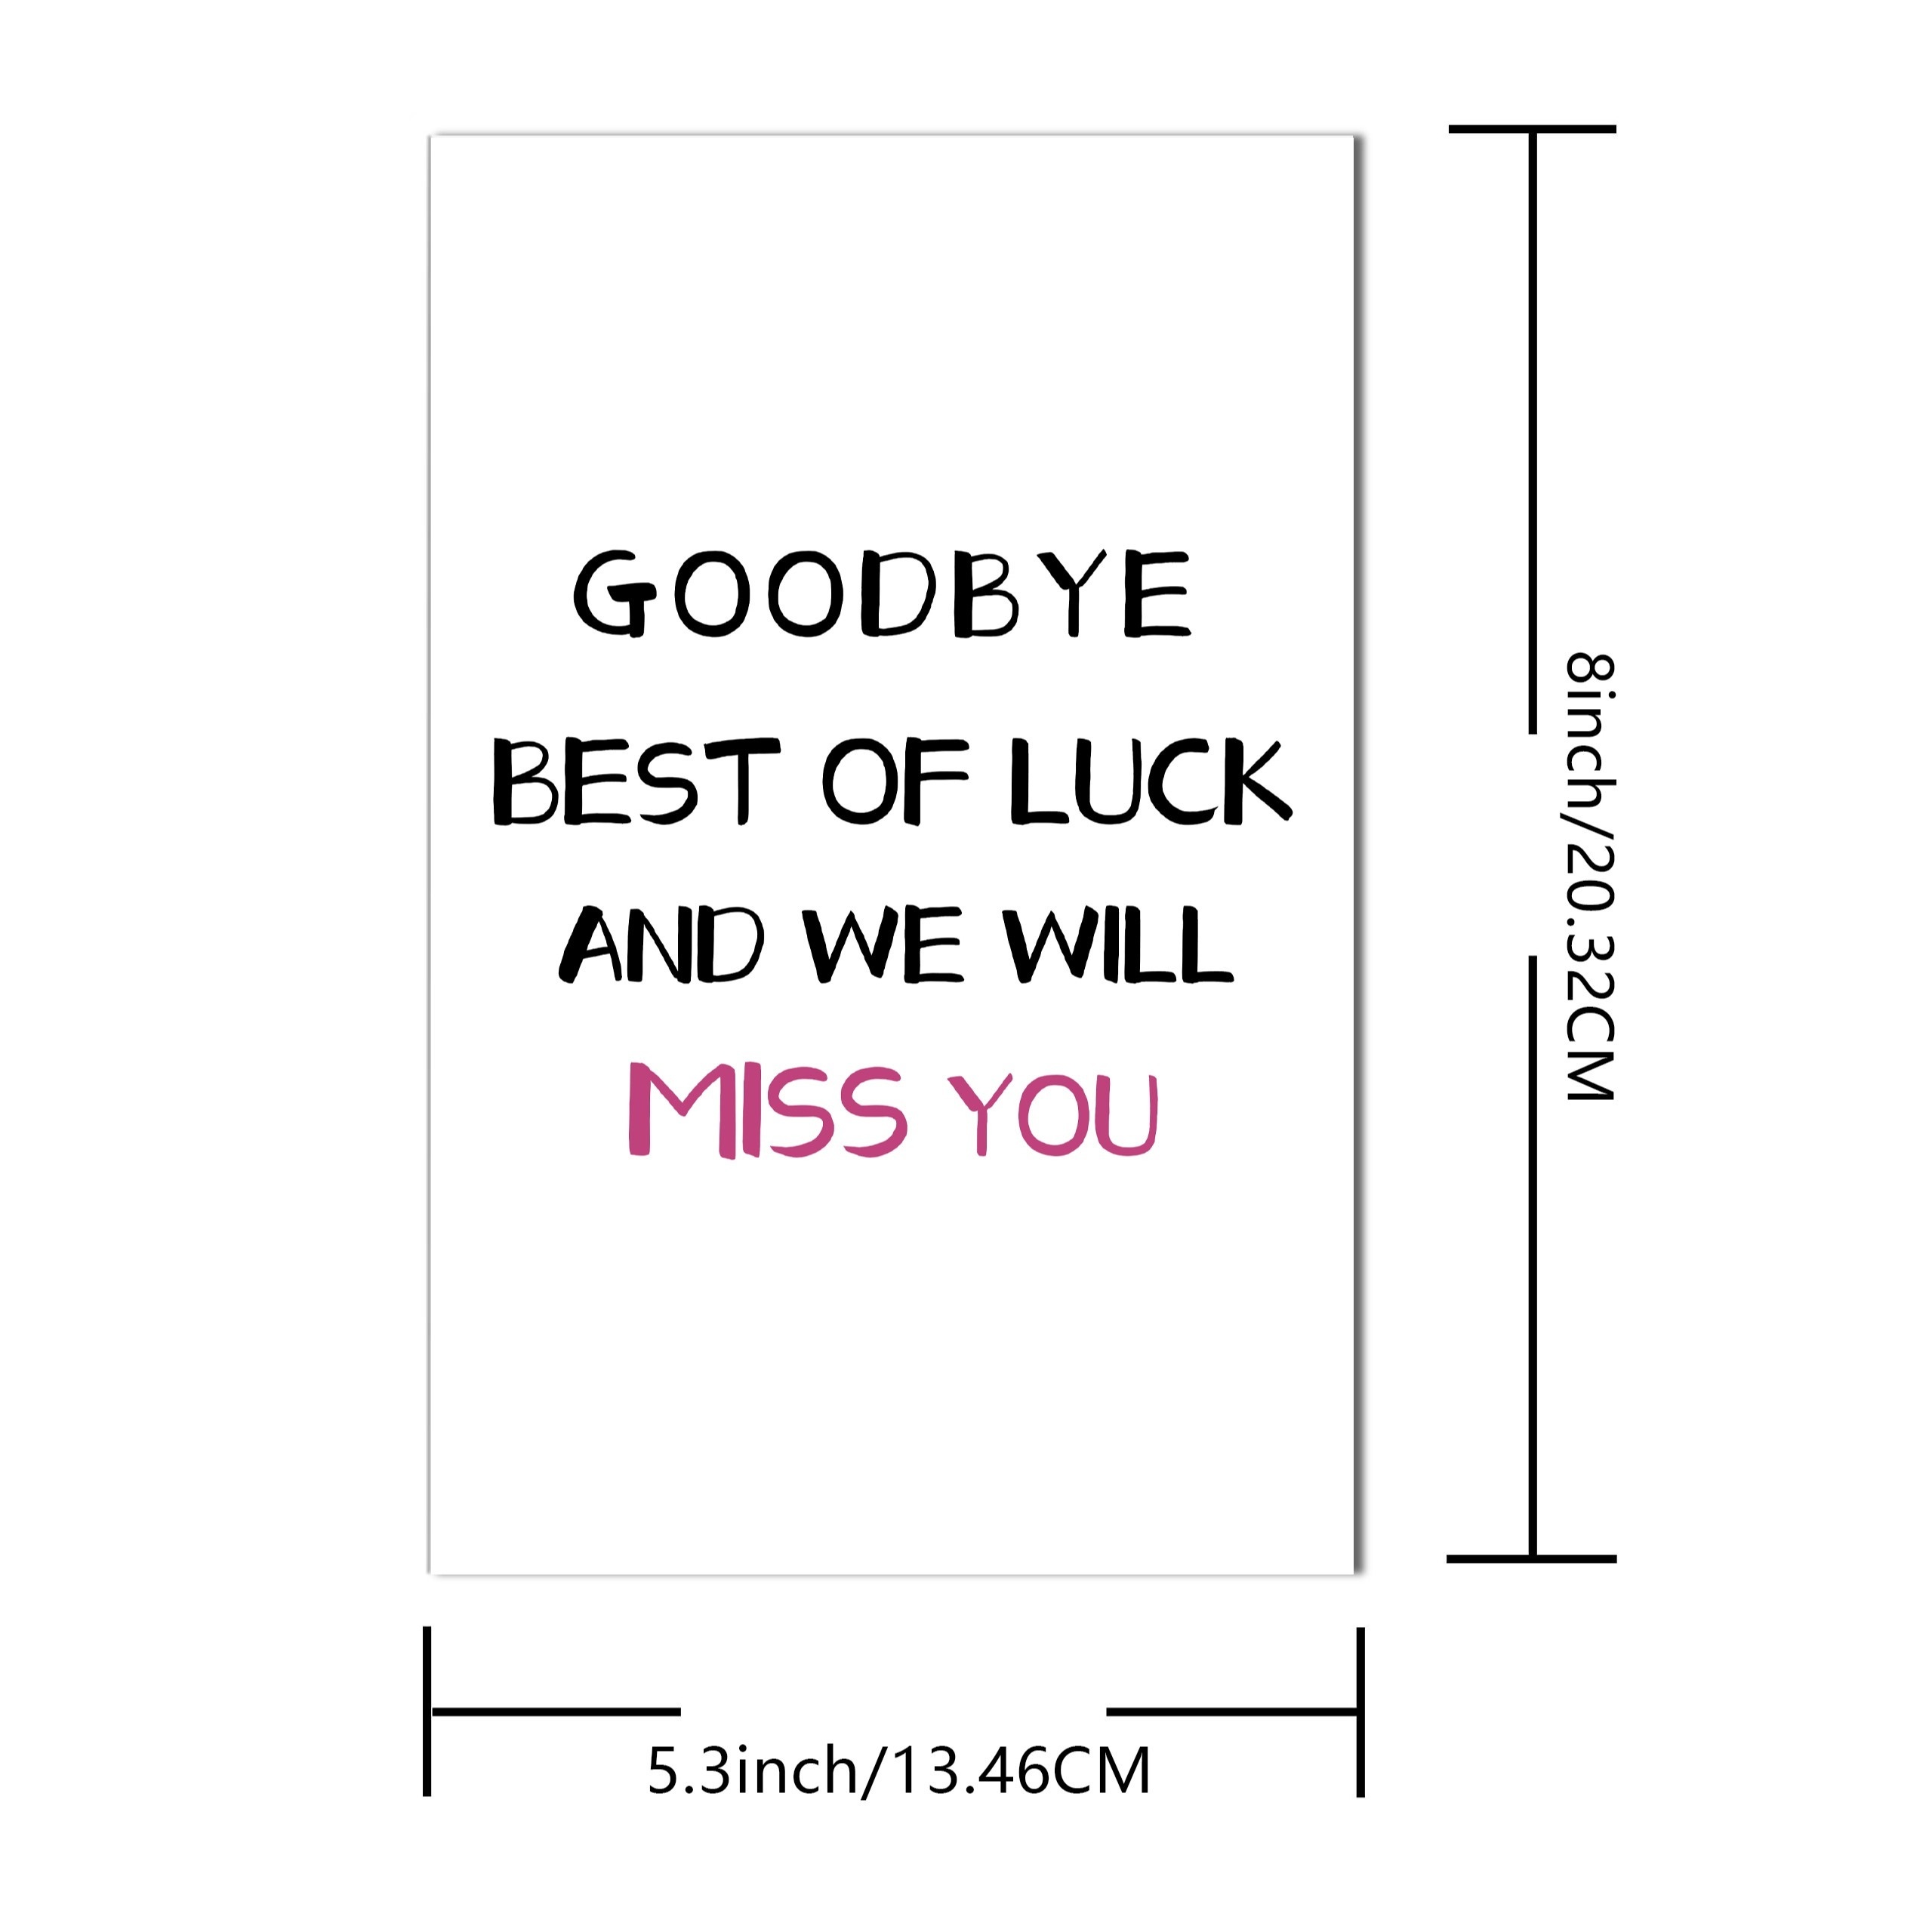 we will miss you cards for coworker